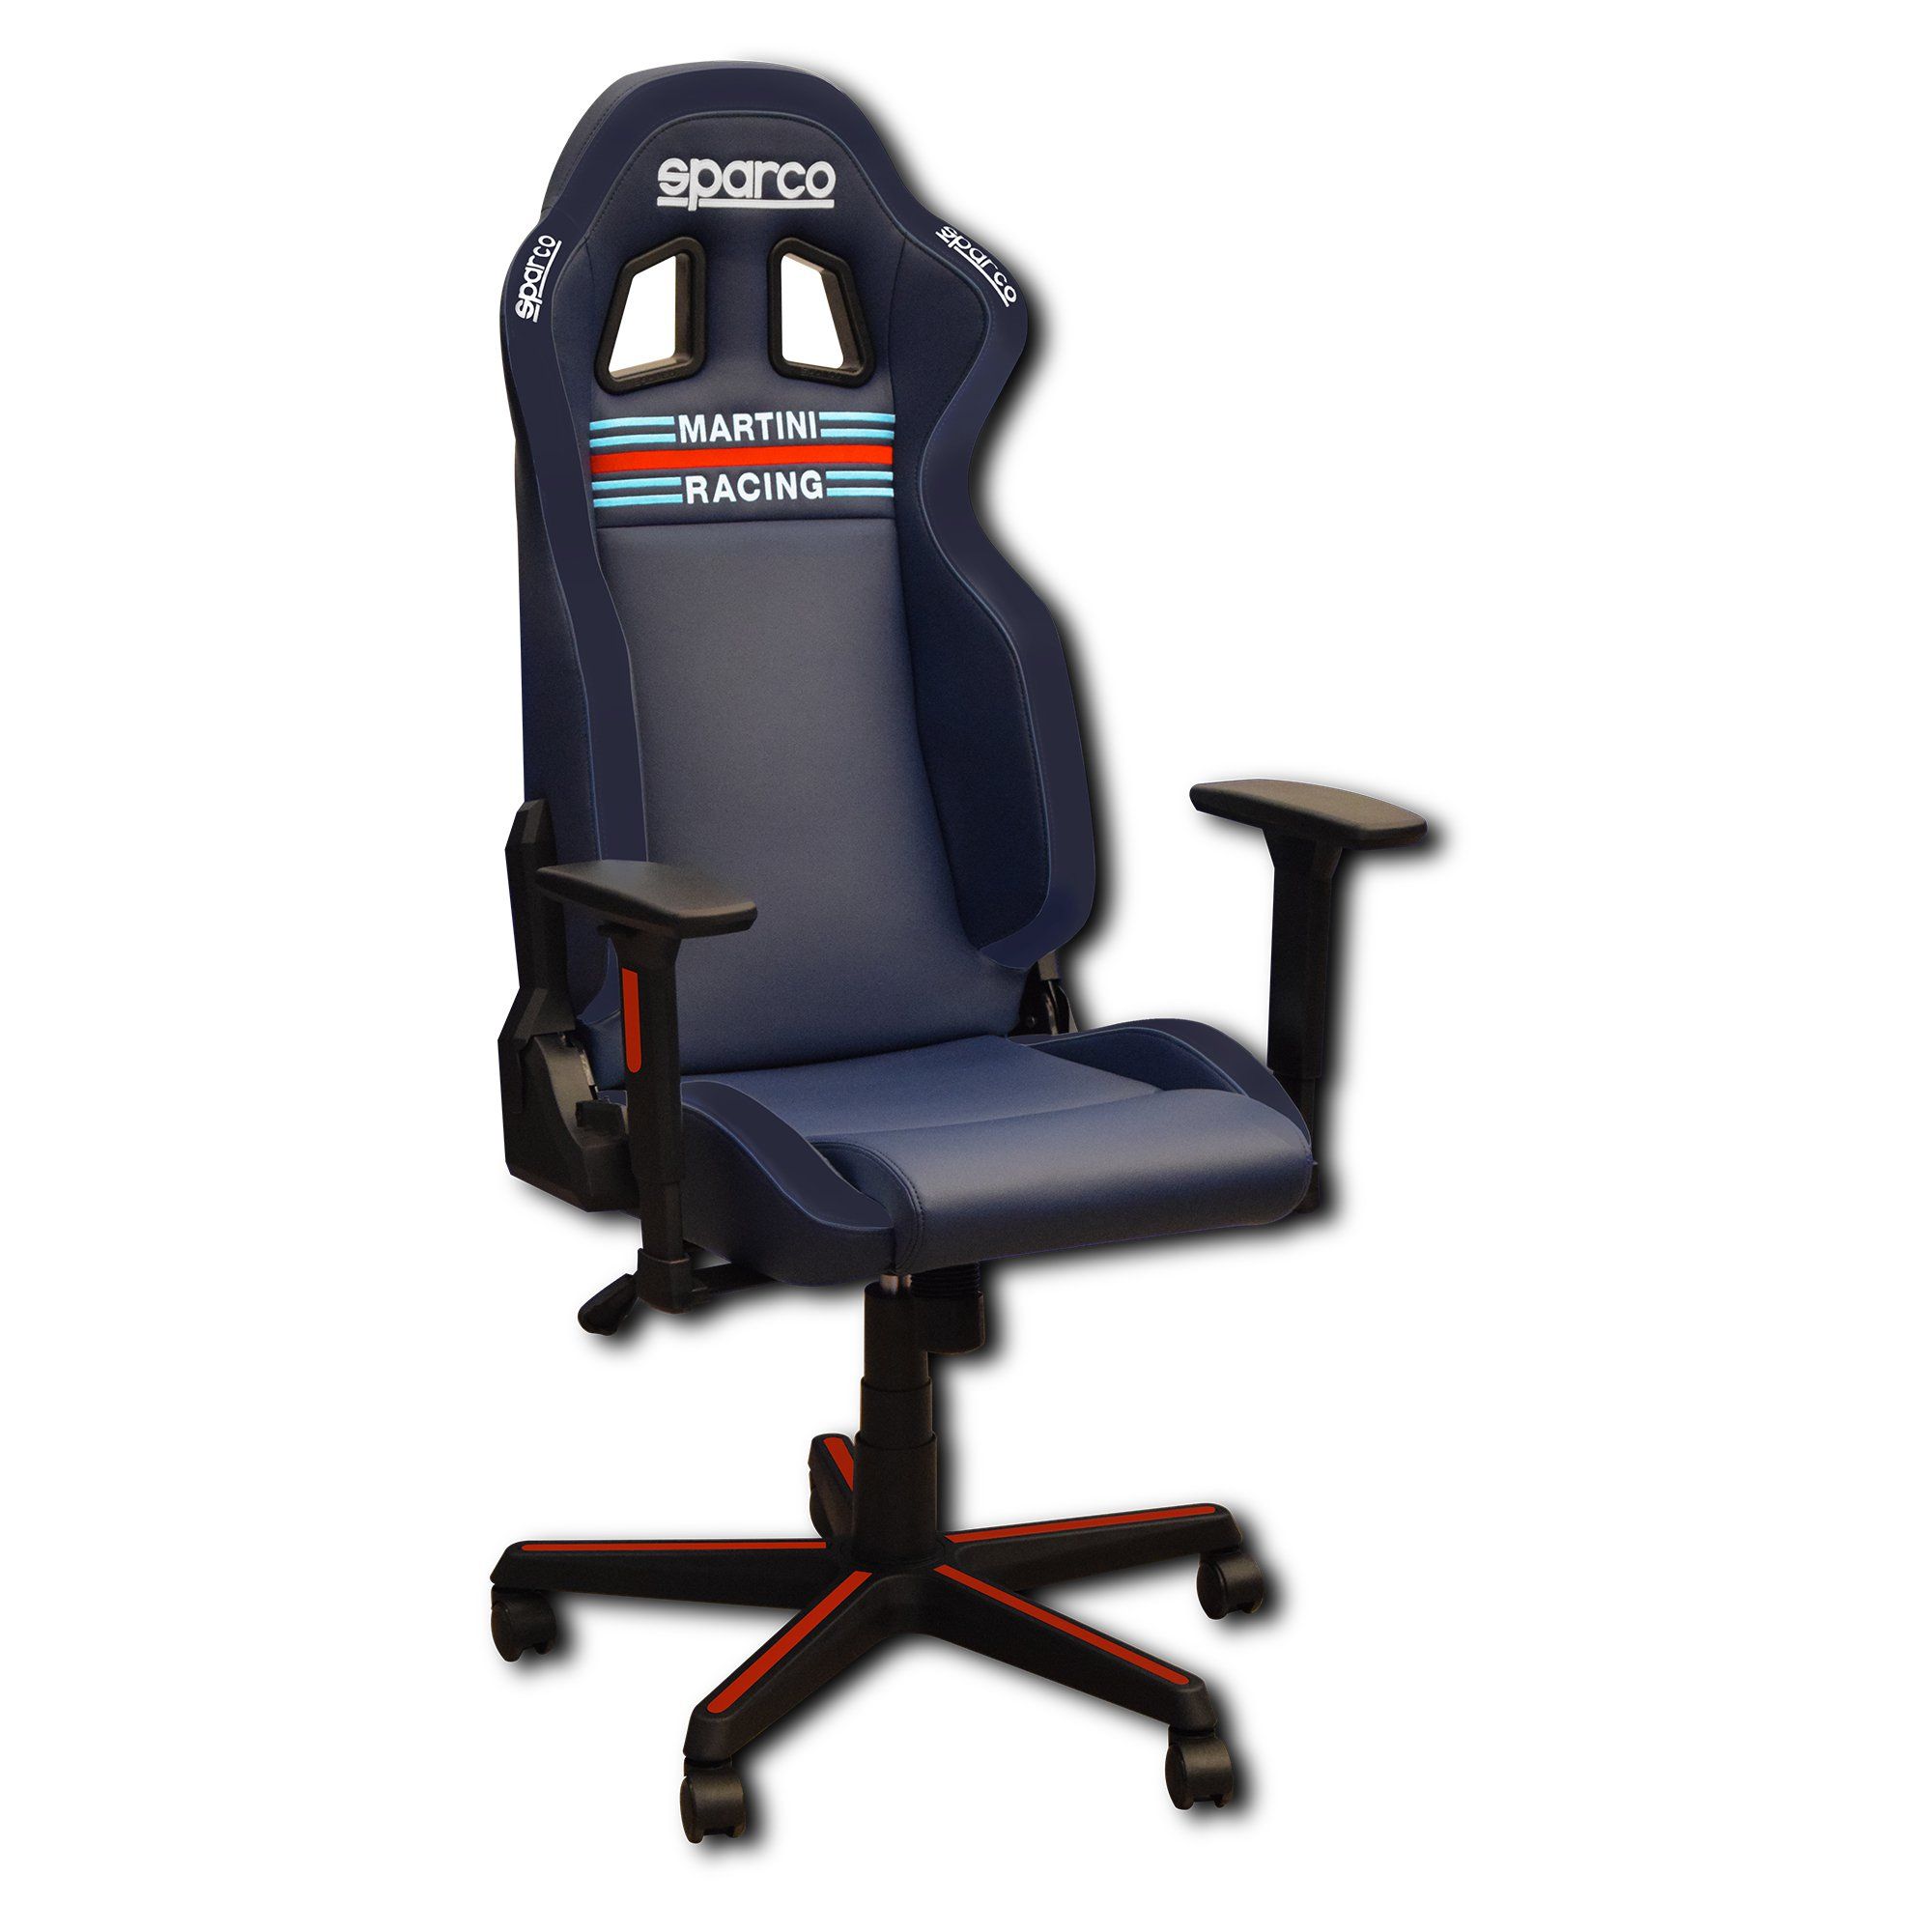 Gaming chair Icon Sparco Martini Racing